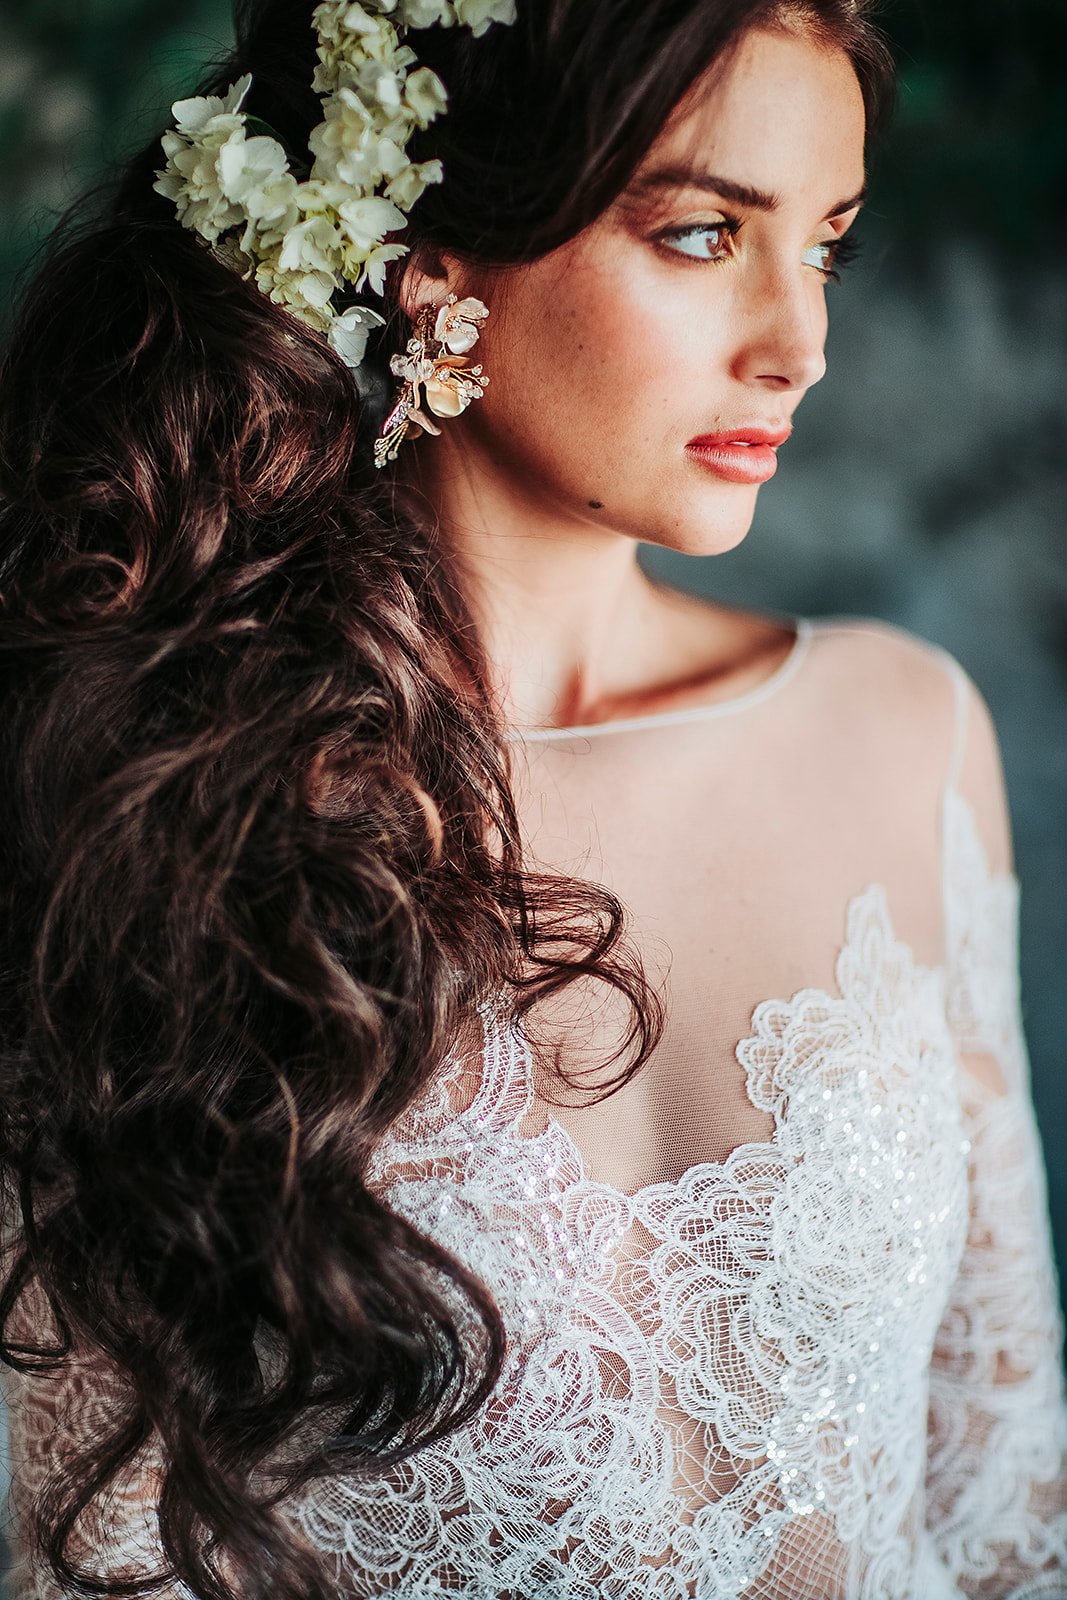 Bridal Hair Jewelry - A Glam New Hairstyle Trend - Hey Wedding Lady